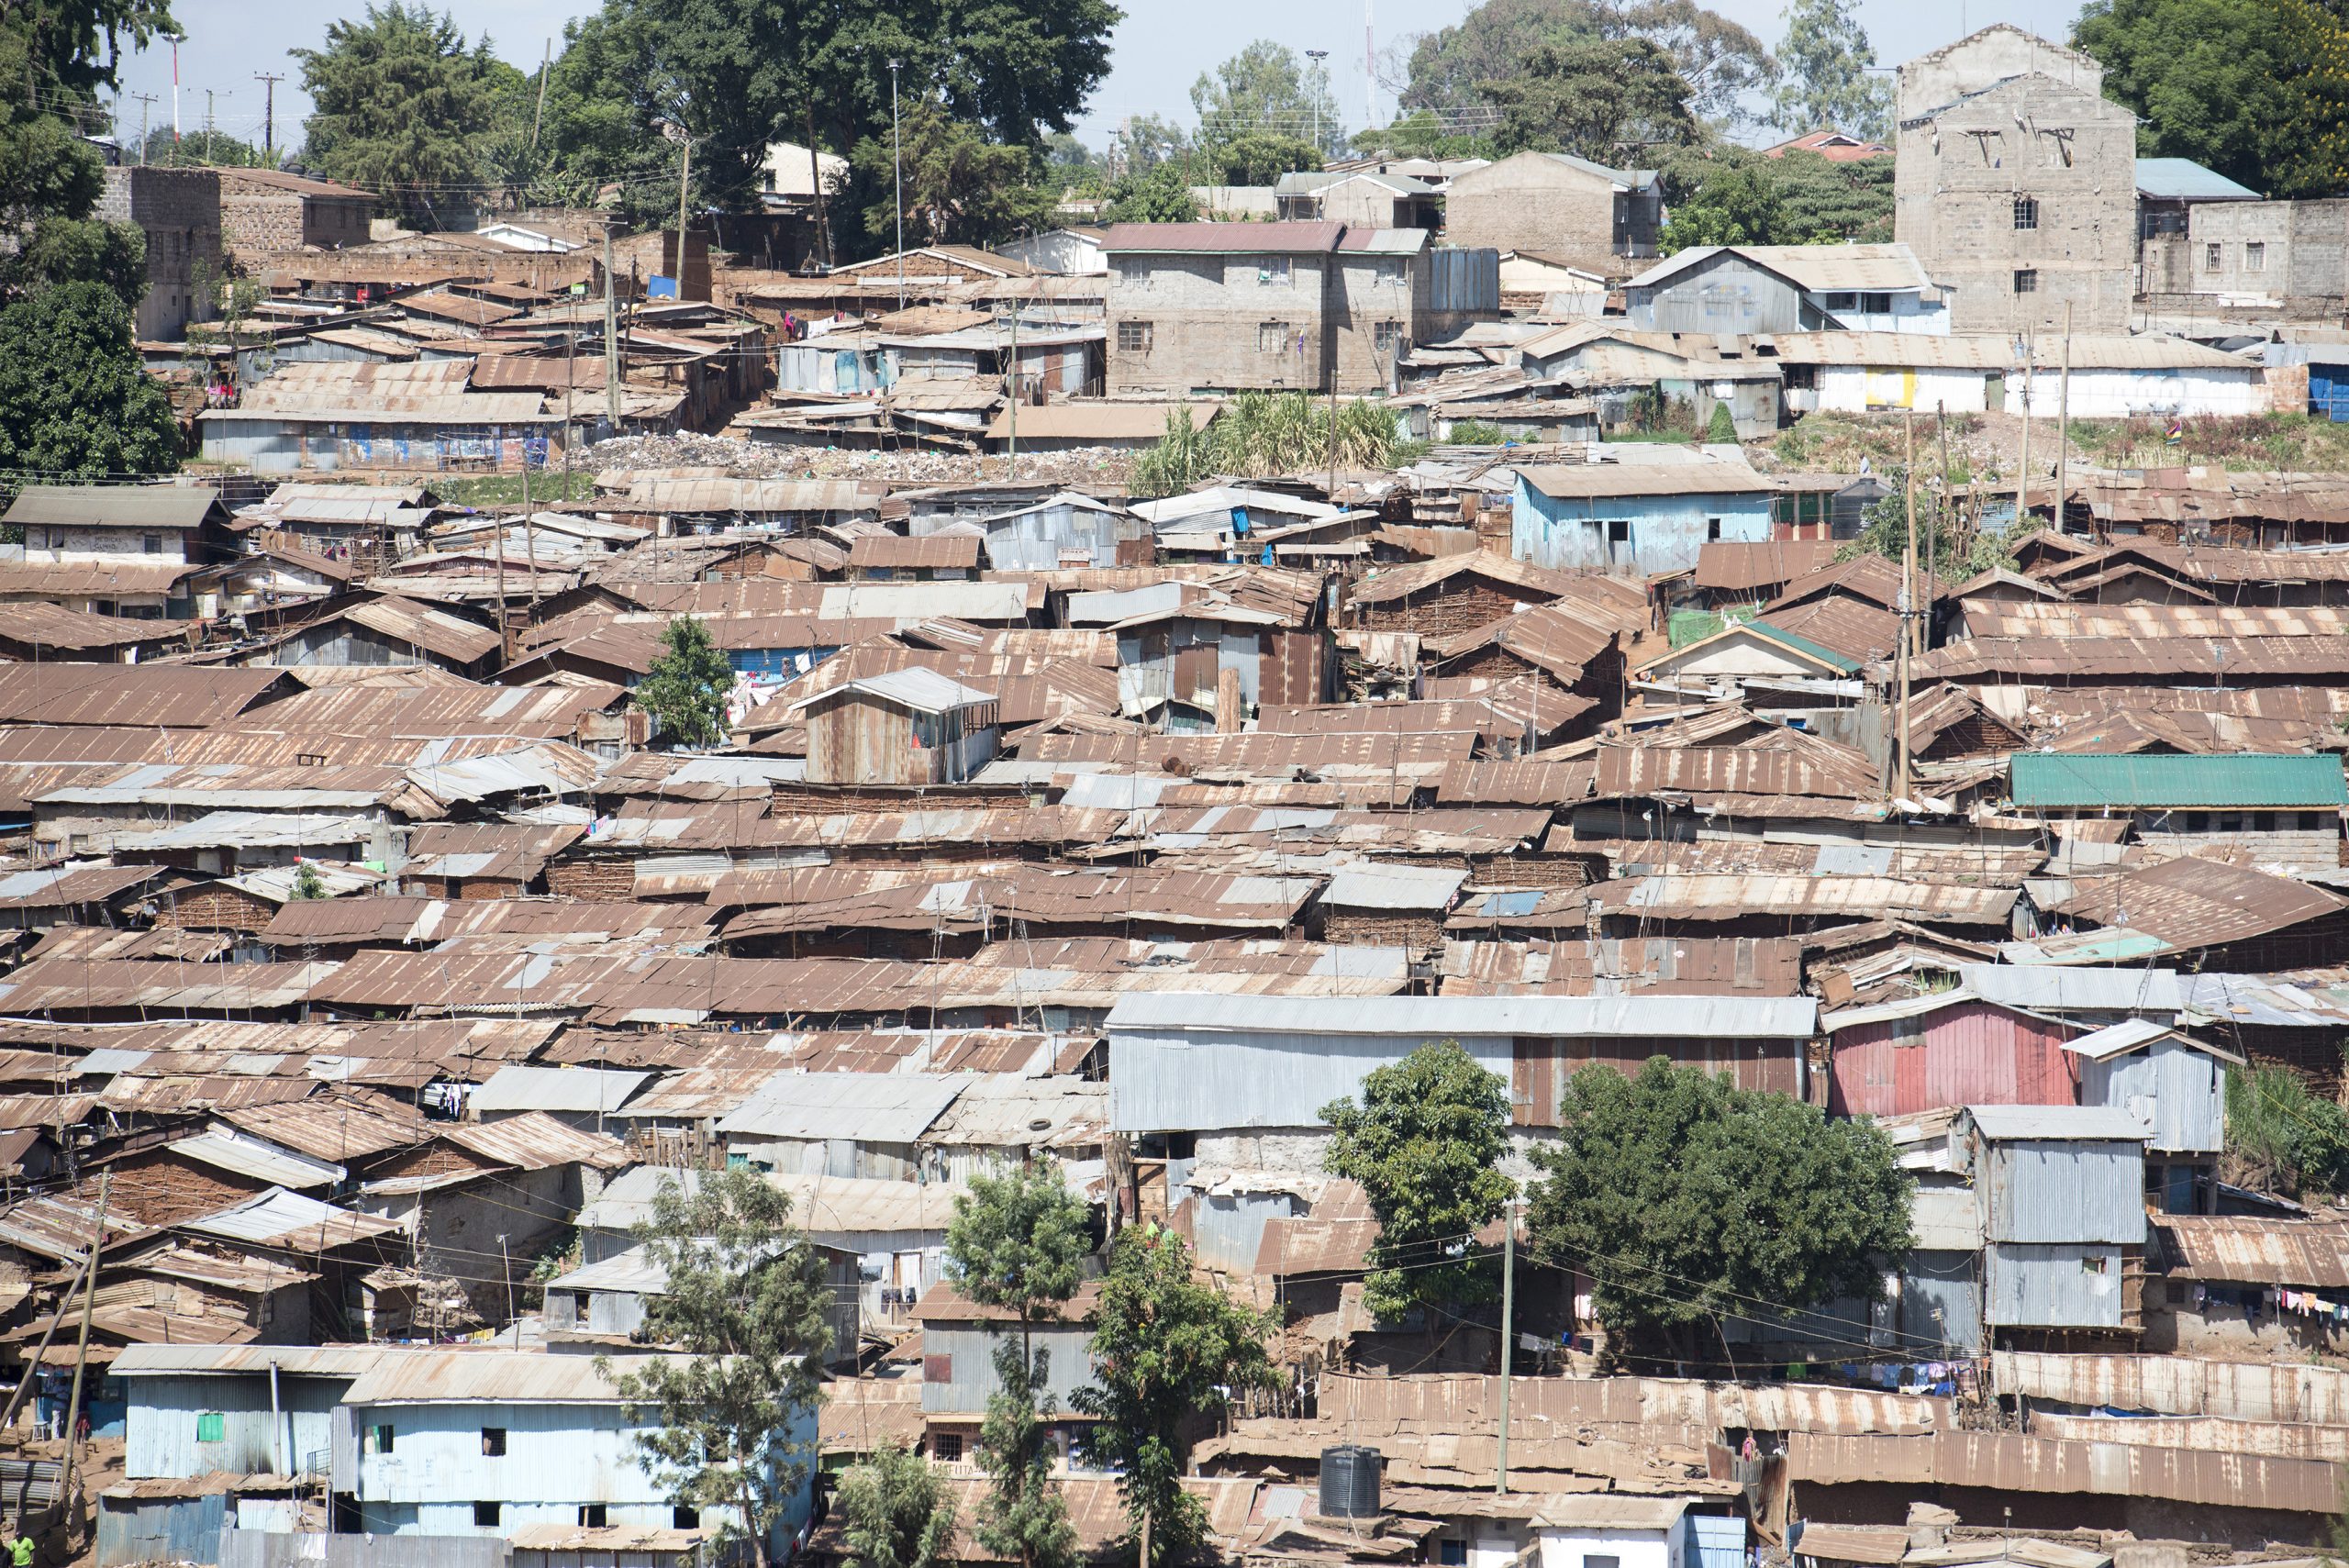 Addressing the reality of climate change in Mathare